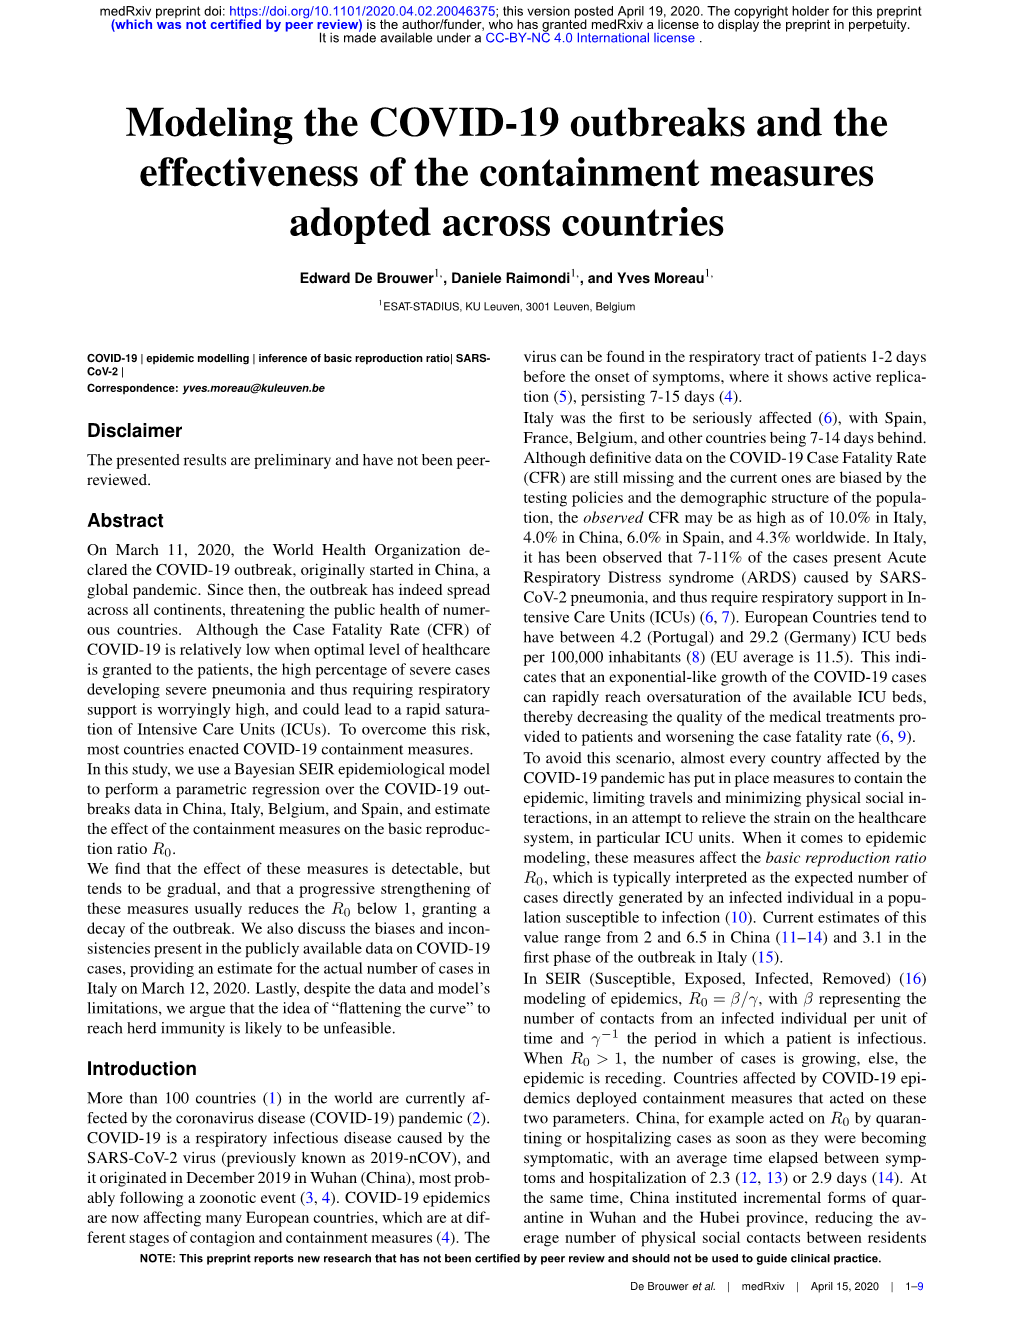 Modeling the COVID-19 Outbreaks and the Effectiveness of the Containment Measures Adopted Across Countries